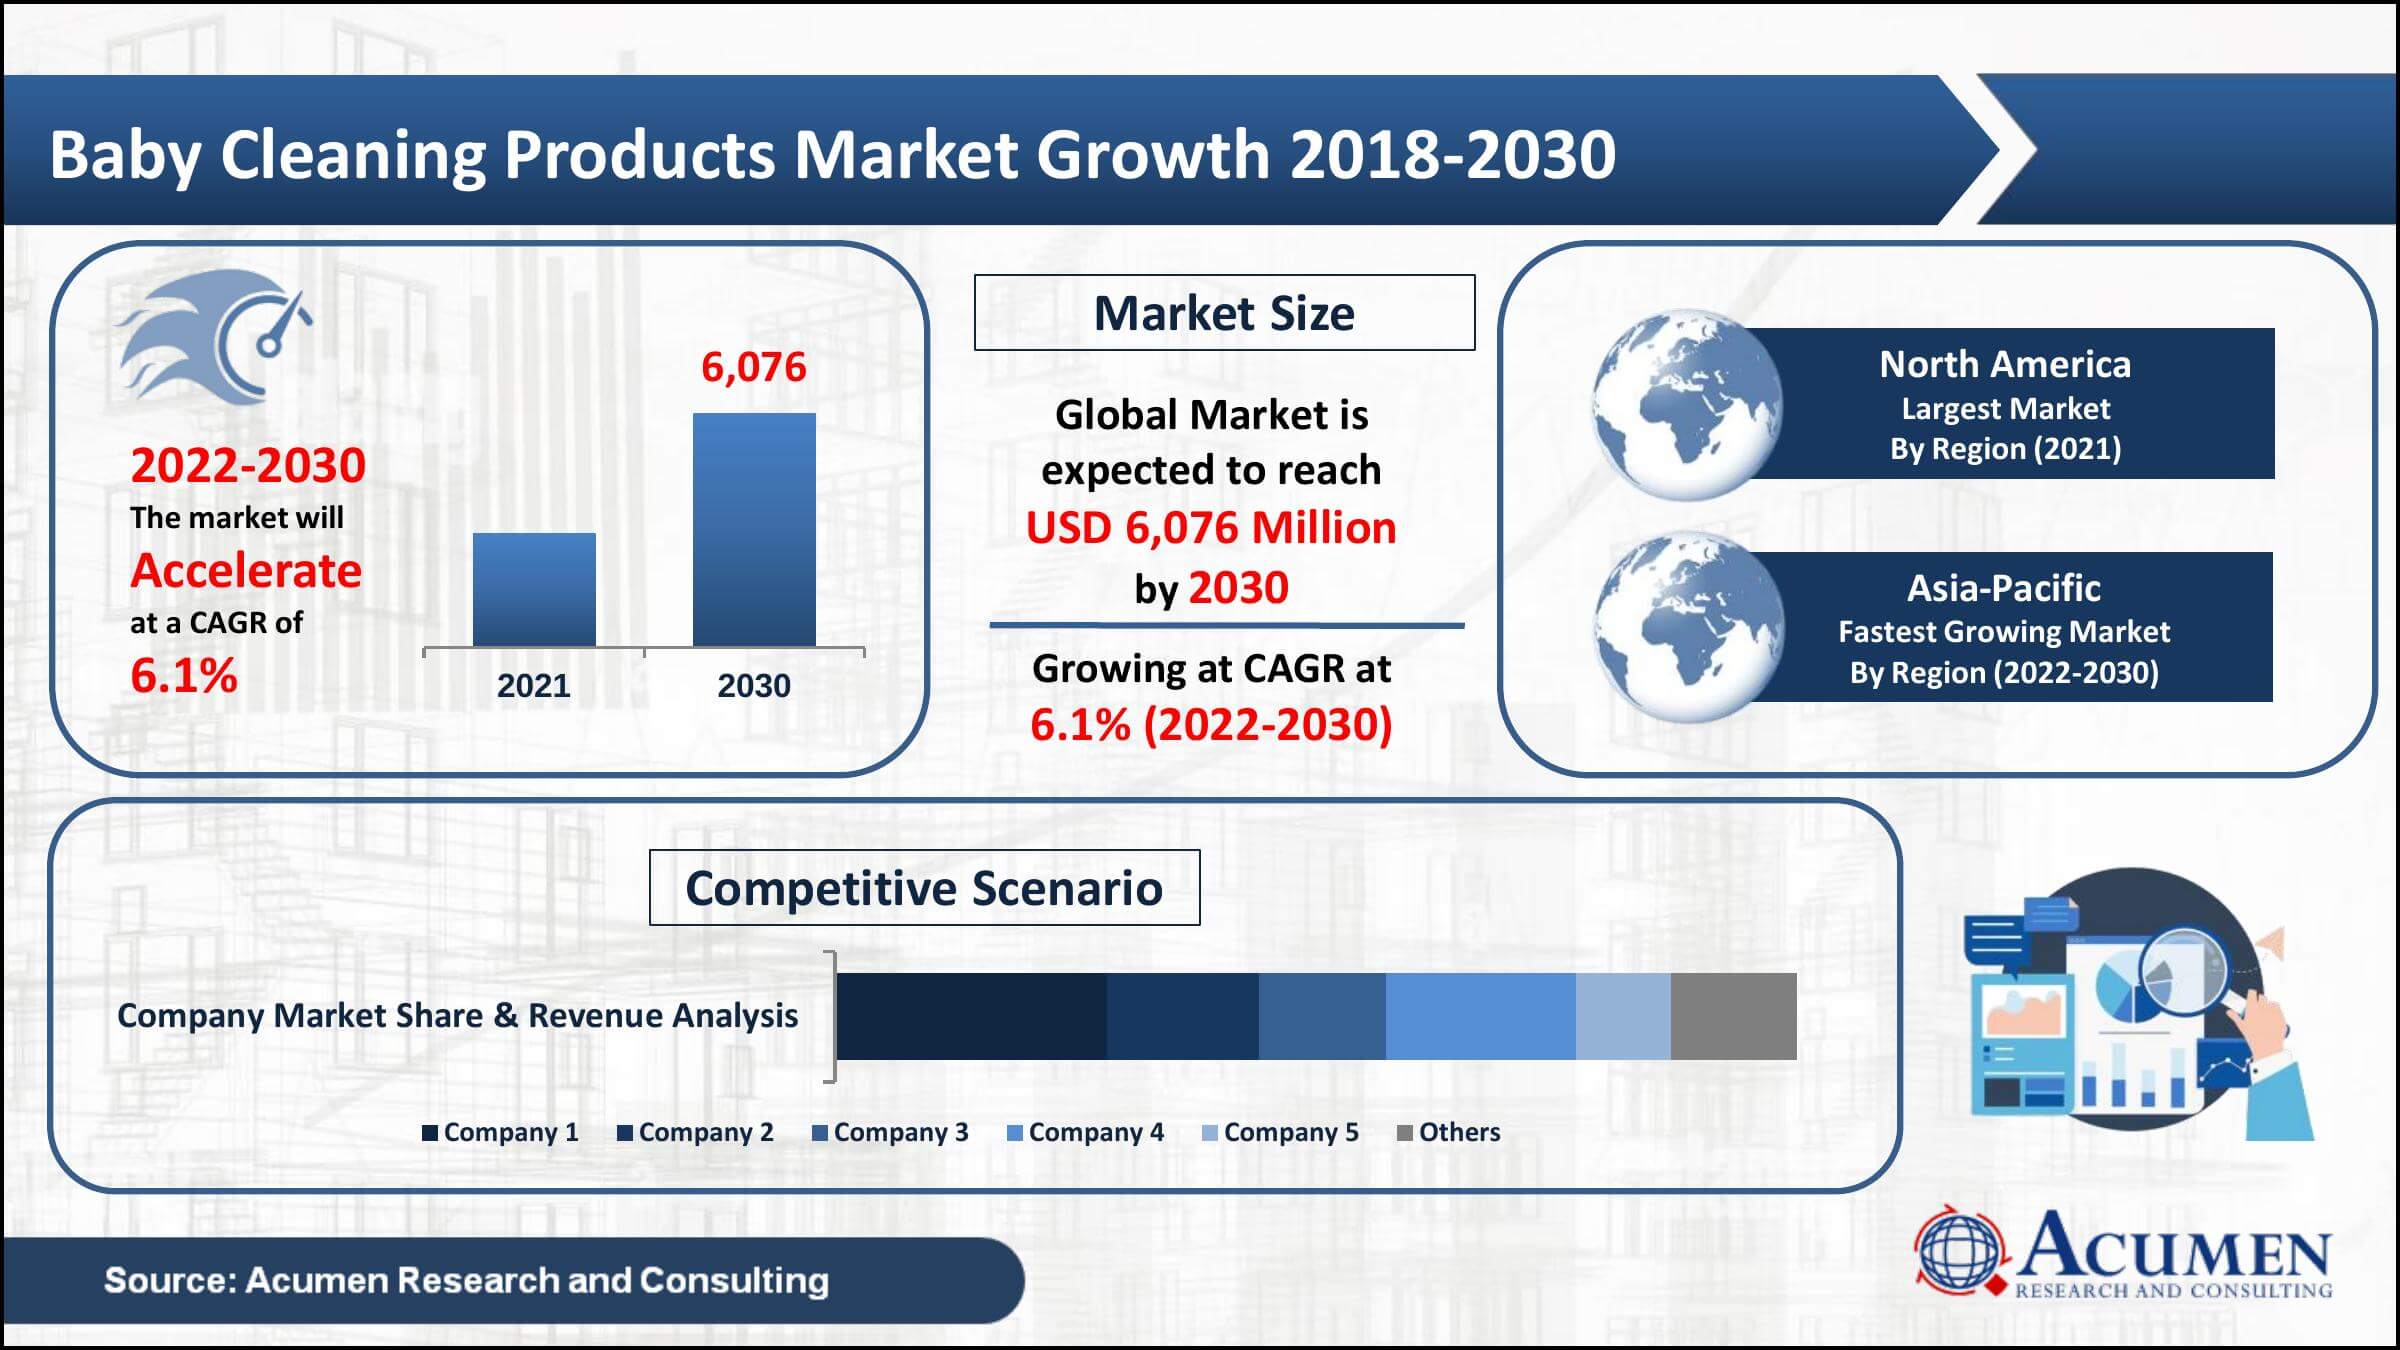 Global baby cleaning products market was worth USD 3,618 Million in 2021, with a 45.9% CAGR from 2022 to 2030